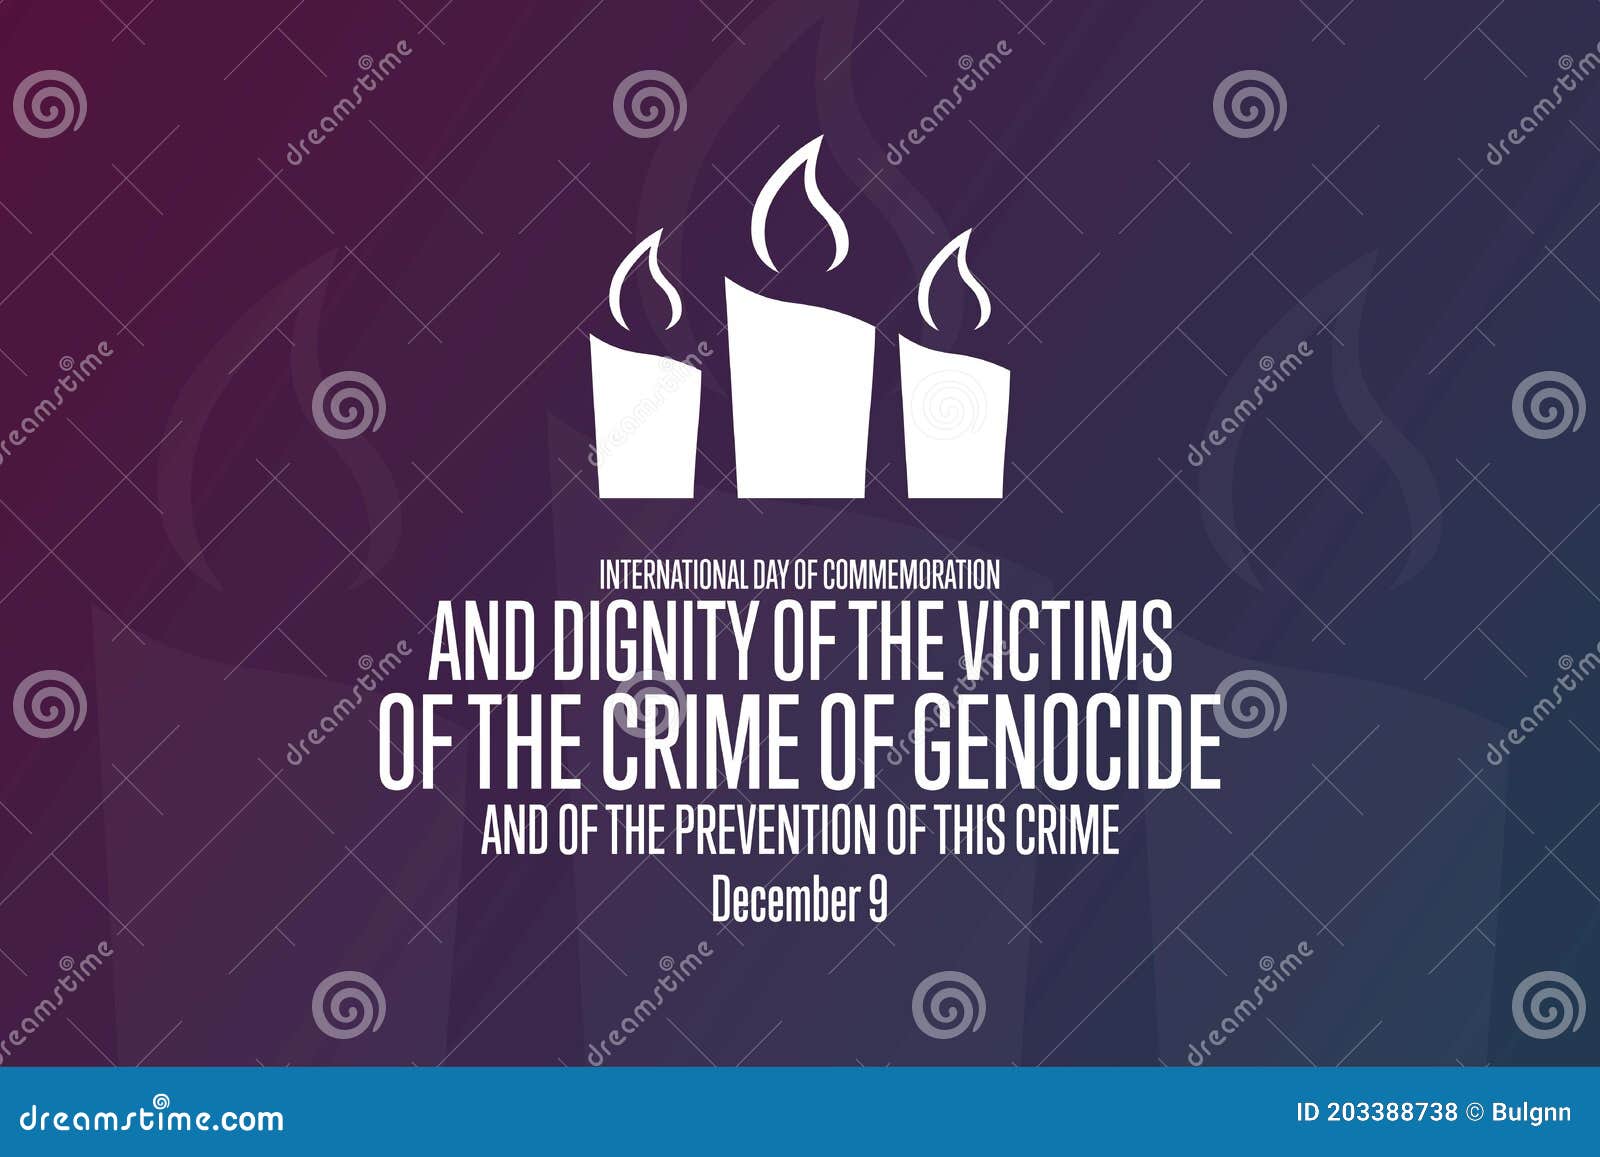 international day of commemoration and dignity of the victims of the crime of genocide and of the prevention of this